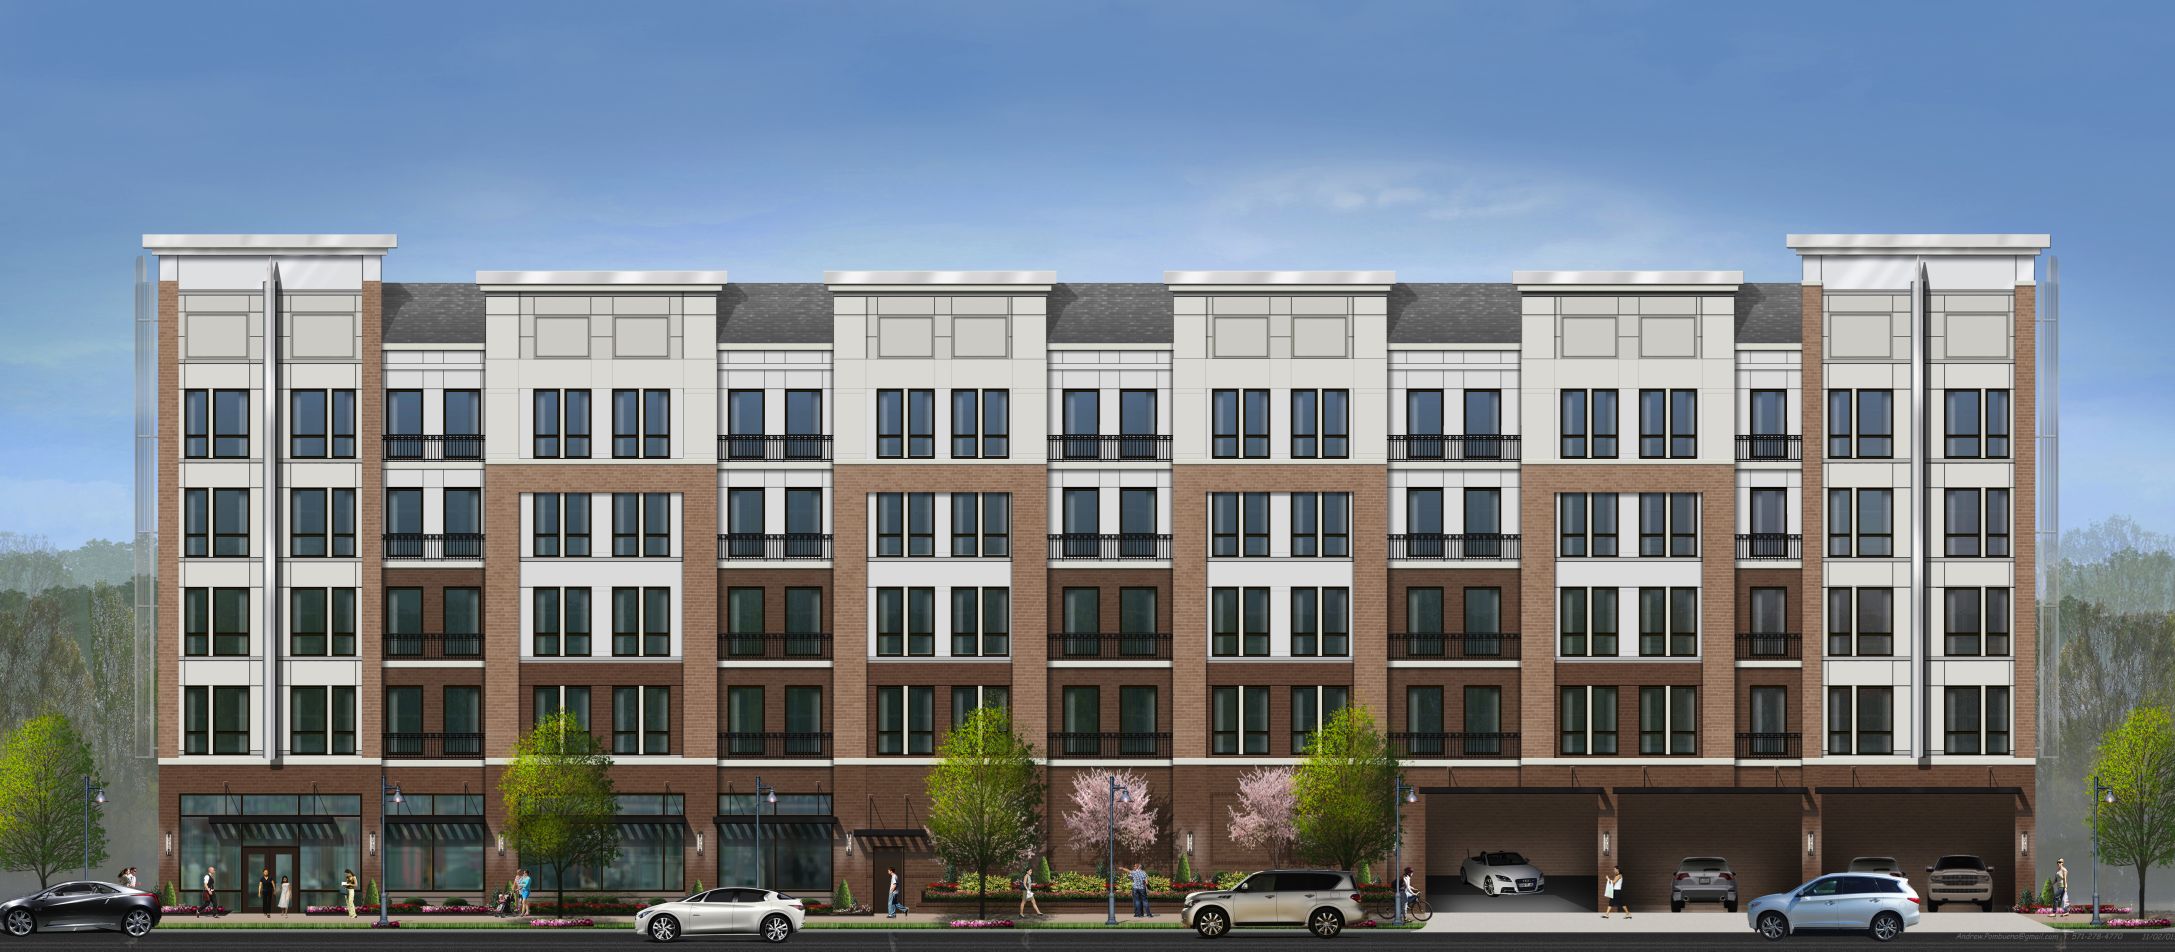 Tax breaks OK’d for 4th Mineola apartment complex